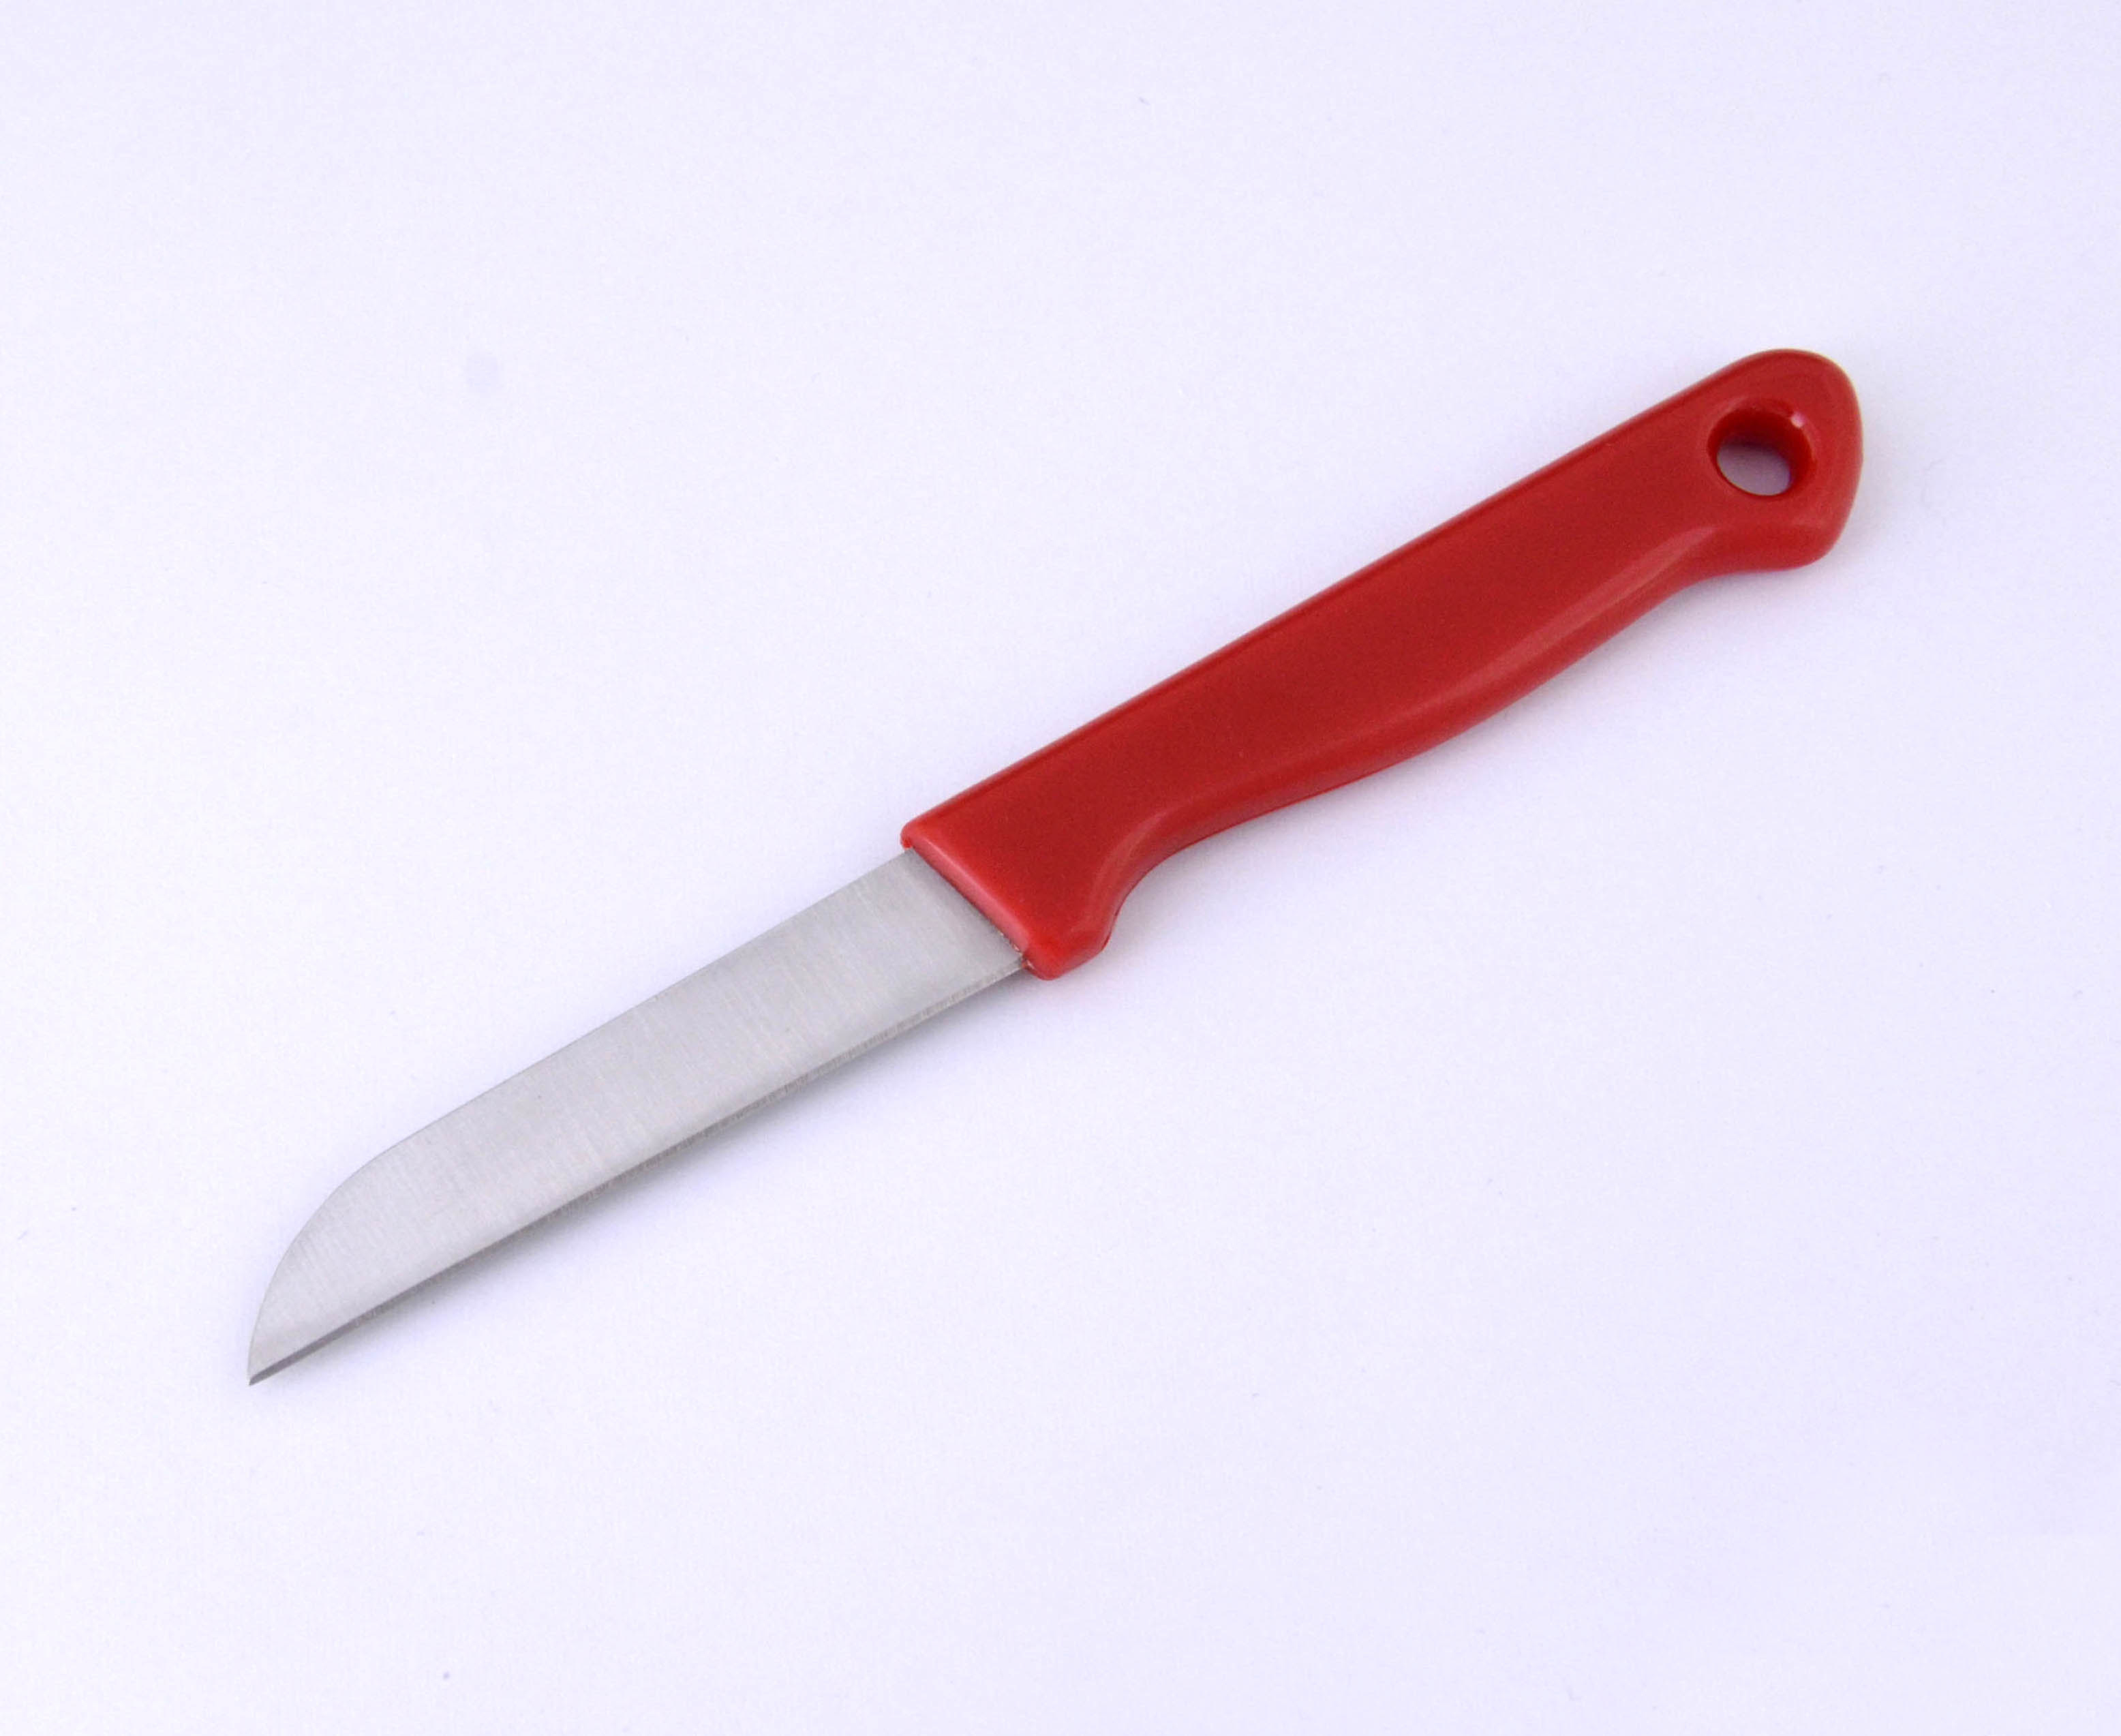 6.8'' High Quality Stainless Steel Kitchen Fruit Knife